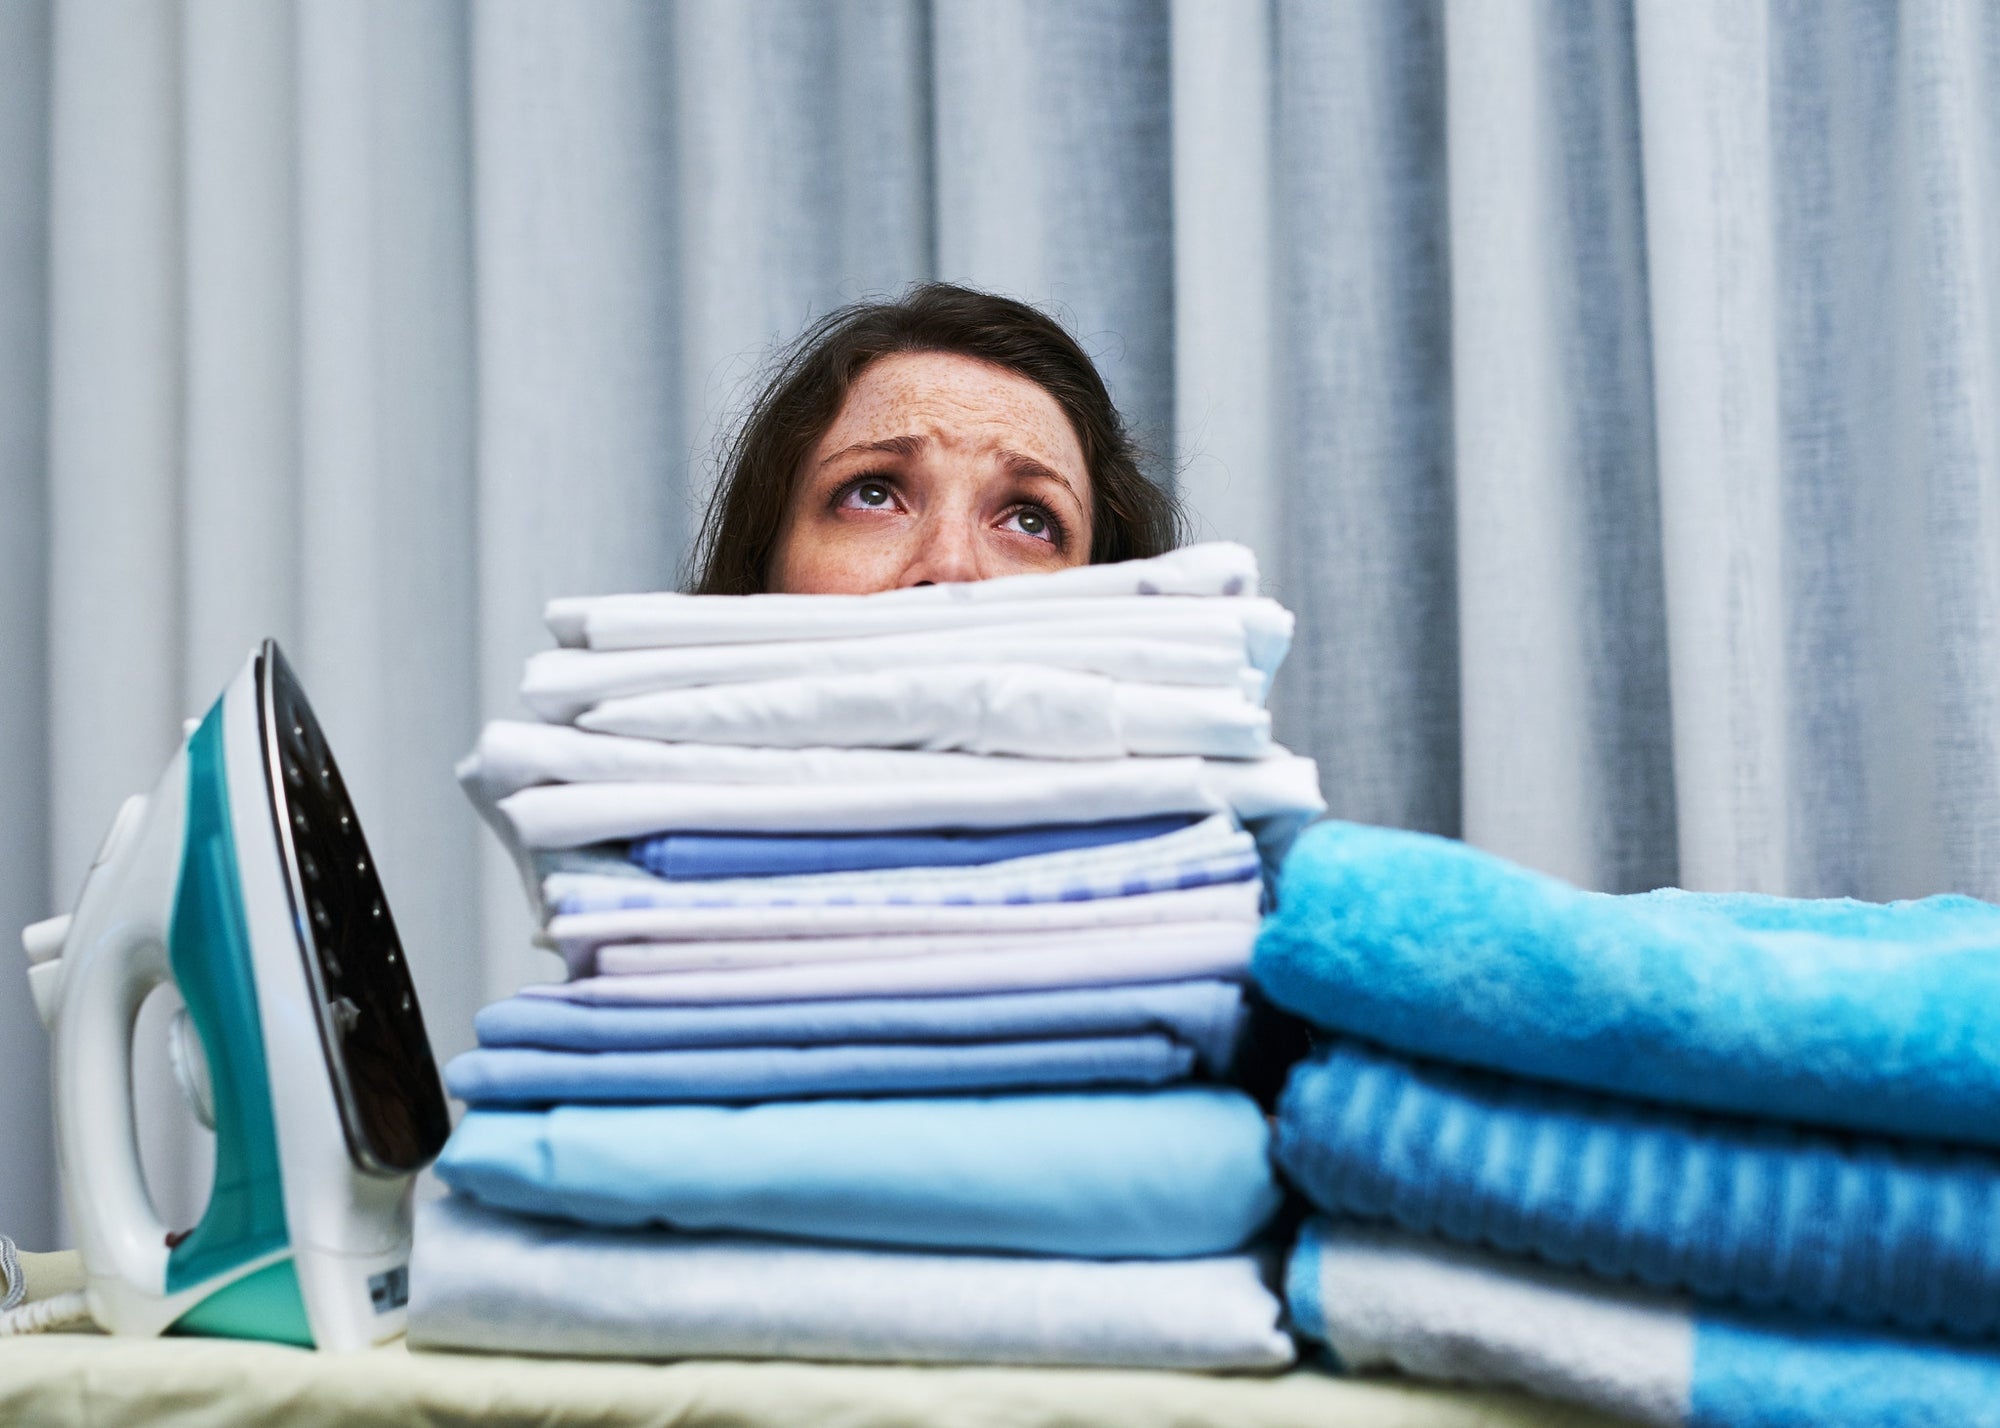 exhausted lady after ironing a pile of clothes